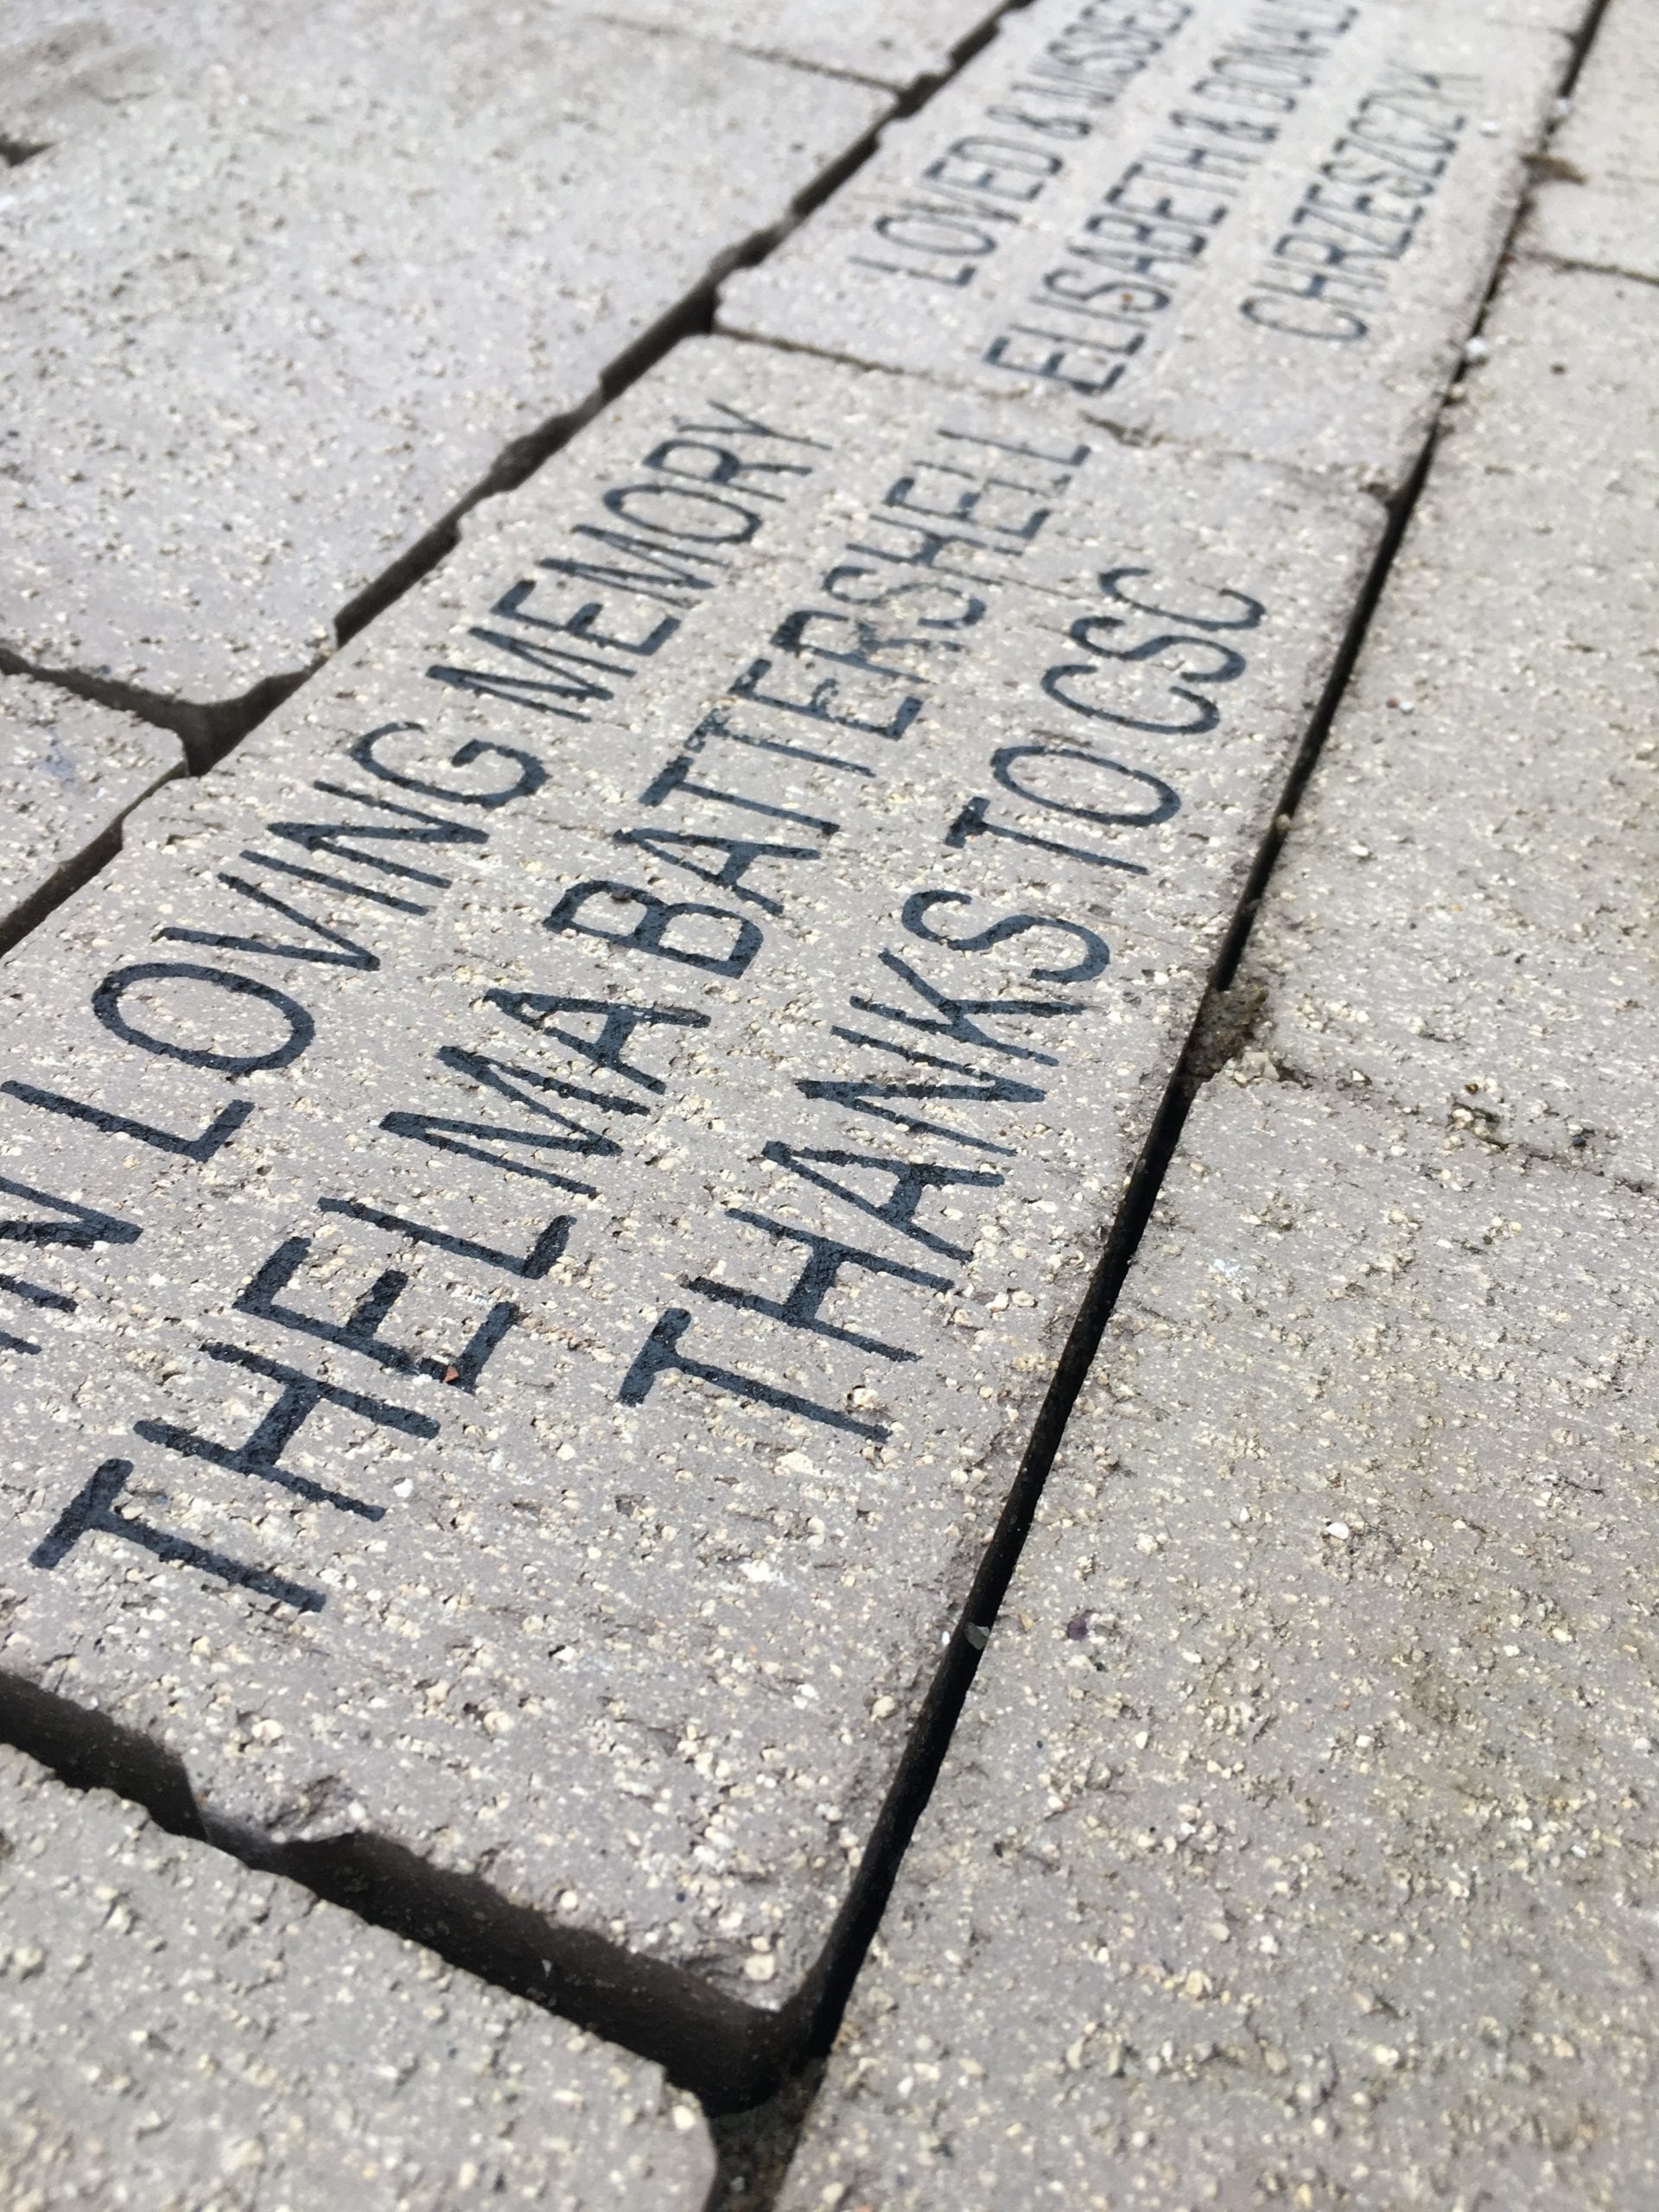 Legacy engraved brick available for purchase at cancer support